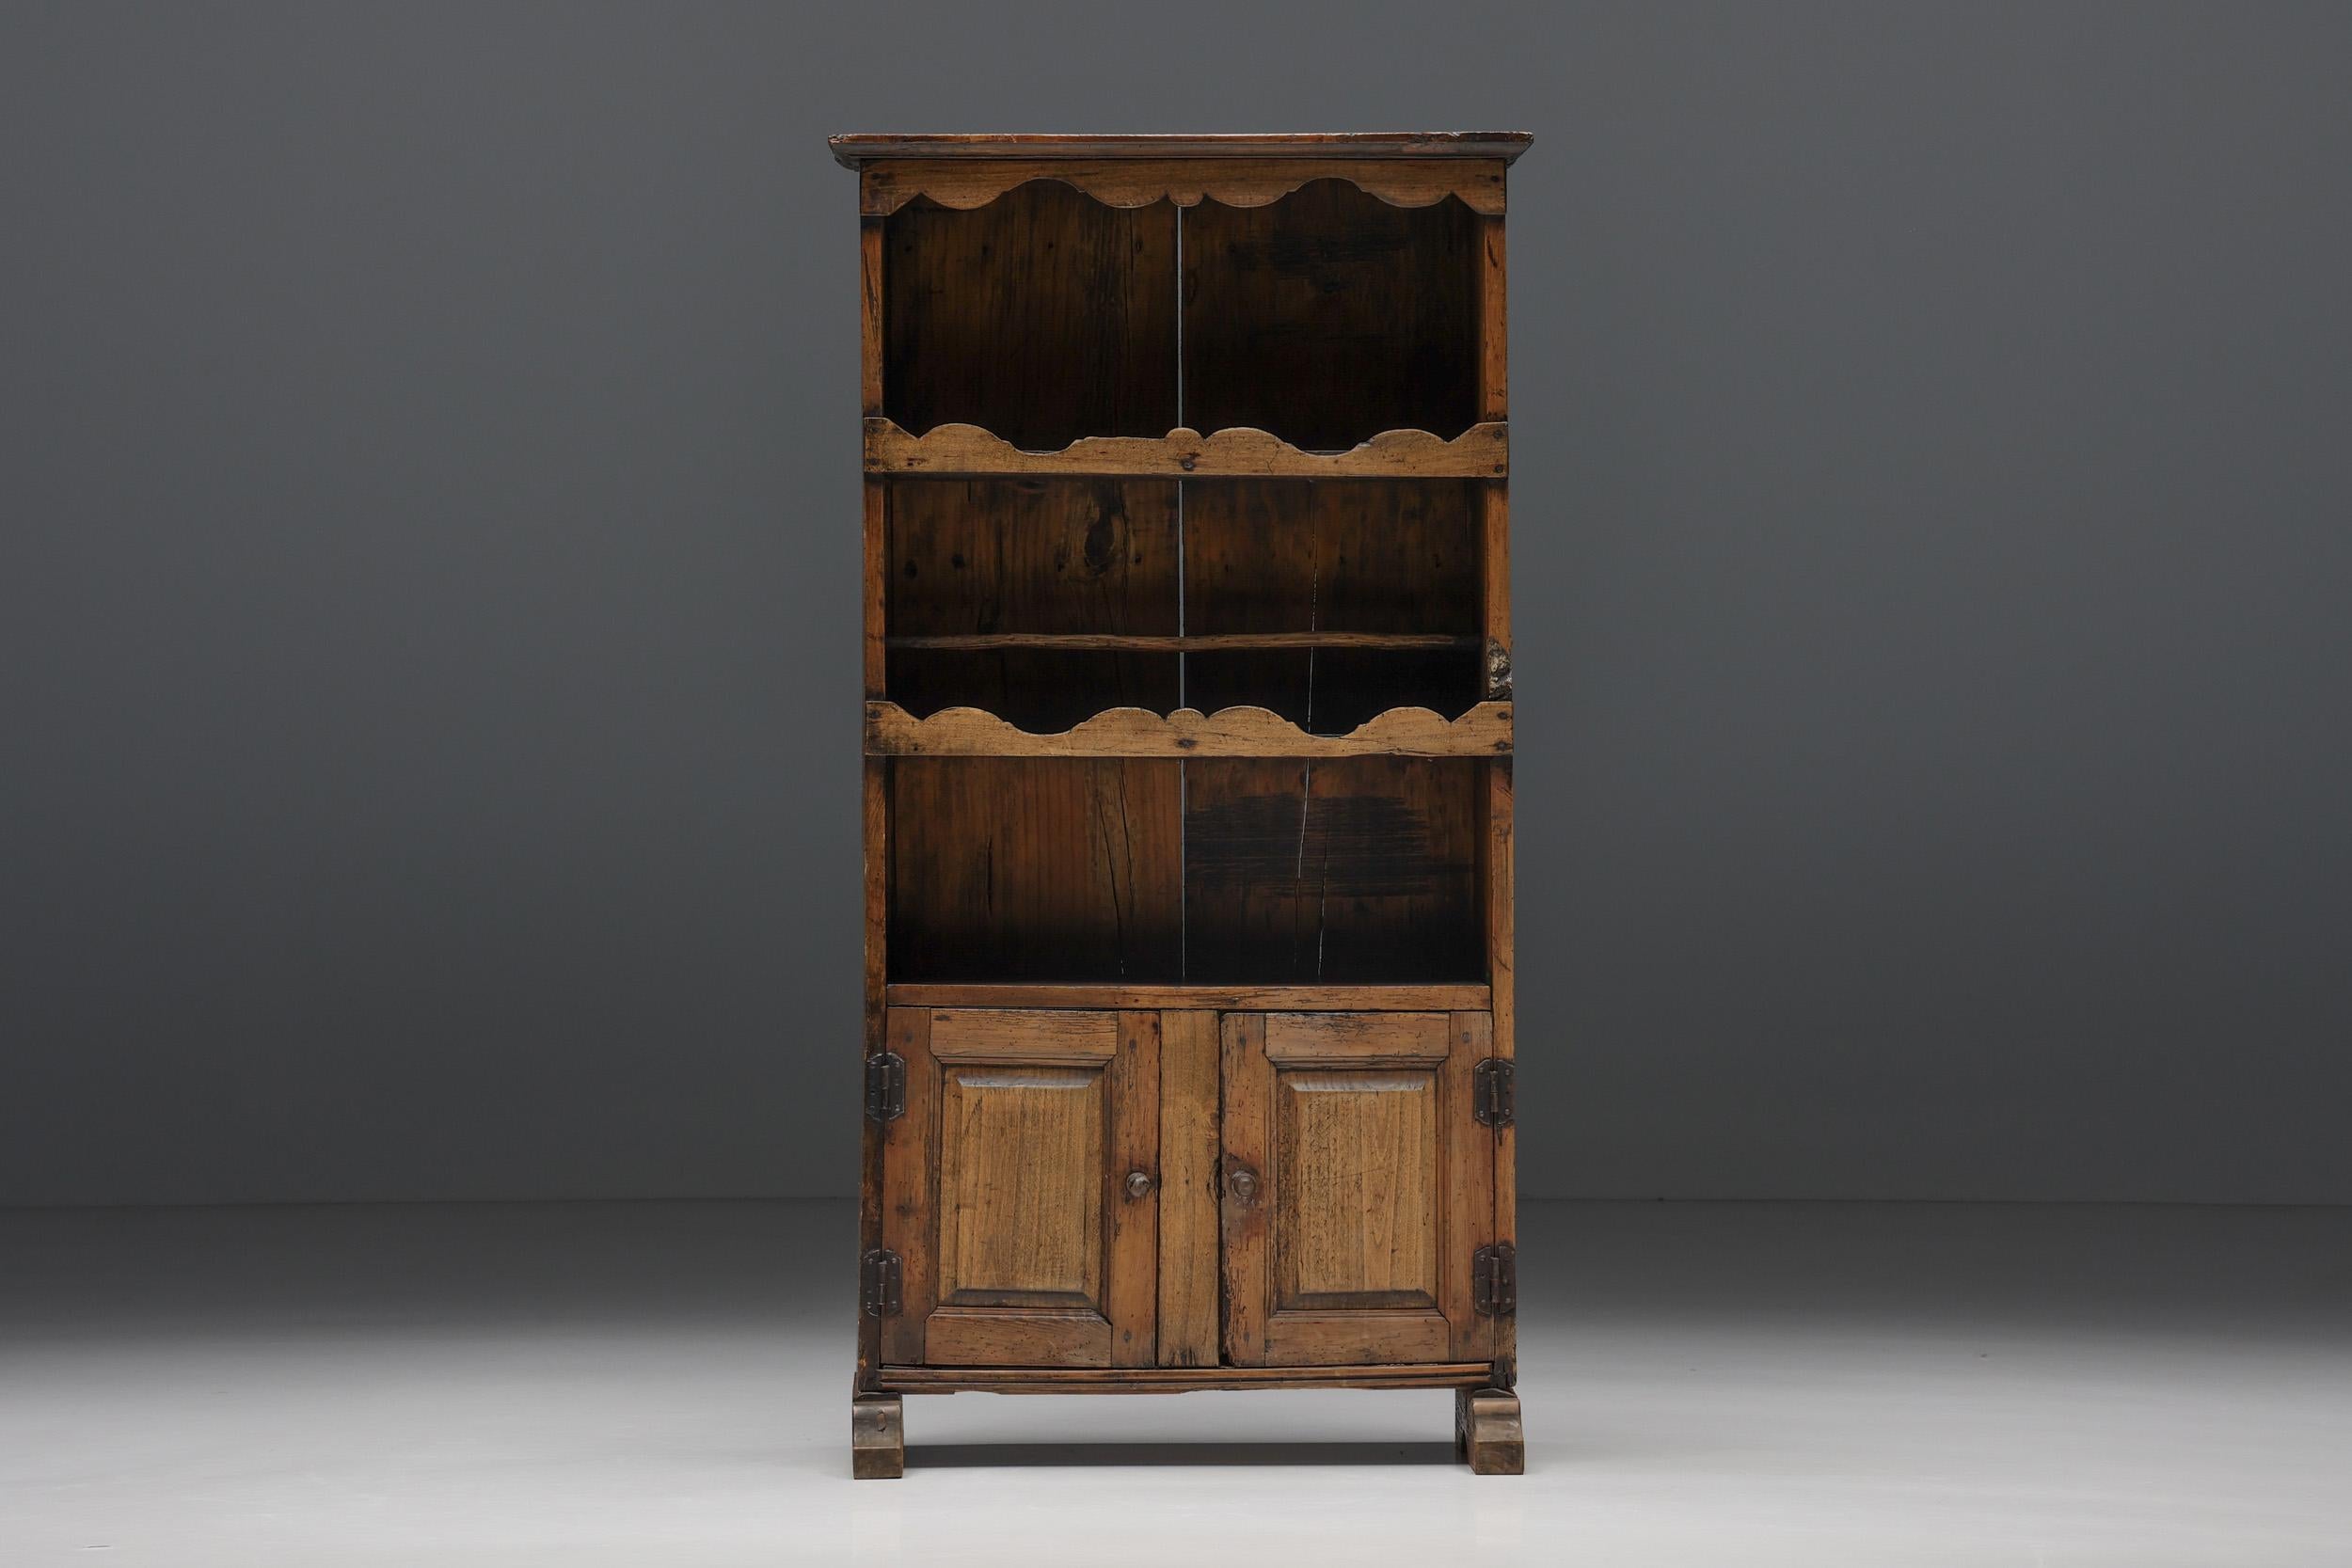 French Rural Wabi Sabi Cupboard, Art Populaire, France, 19th Century